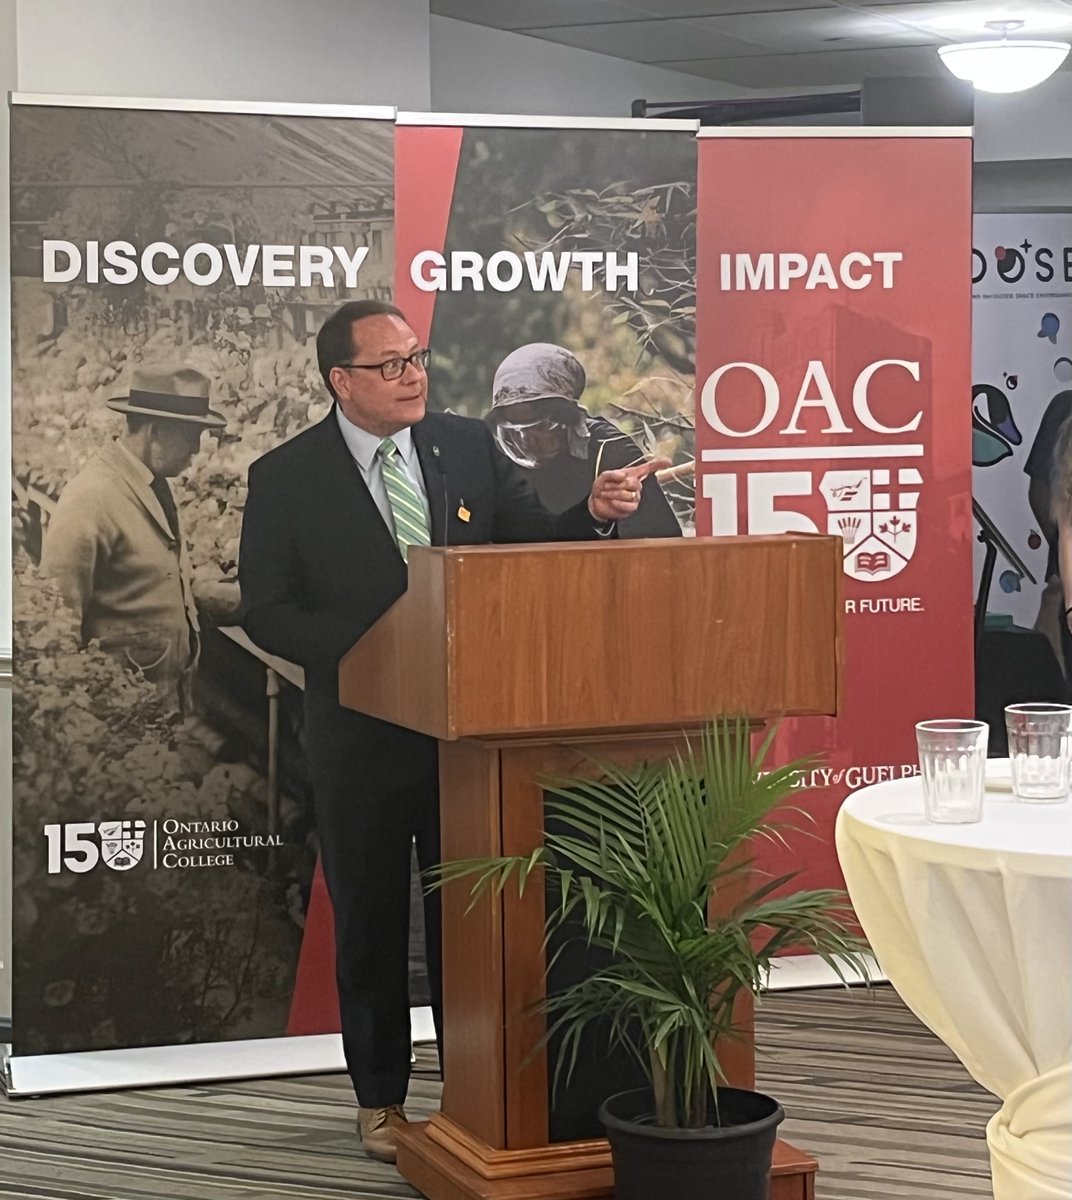 Wonderful evening last night welcoming the @uofg to Queen's Park to share with MPPs all ways that the university is improving life in our community and around the world. This is the 150th anniversary of the Ontario Agricultural College, ranked 1st in Canada for food & ag science.